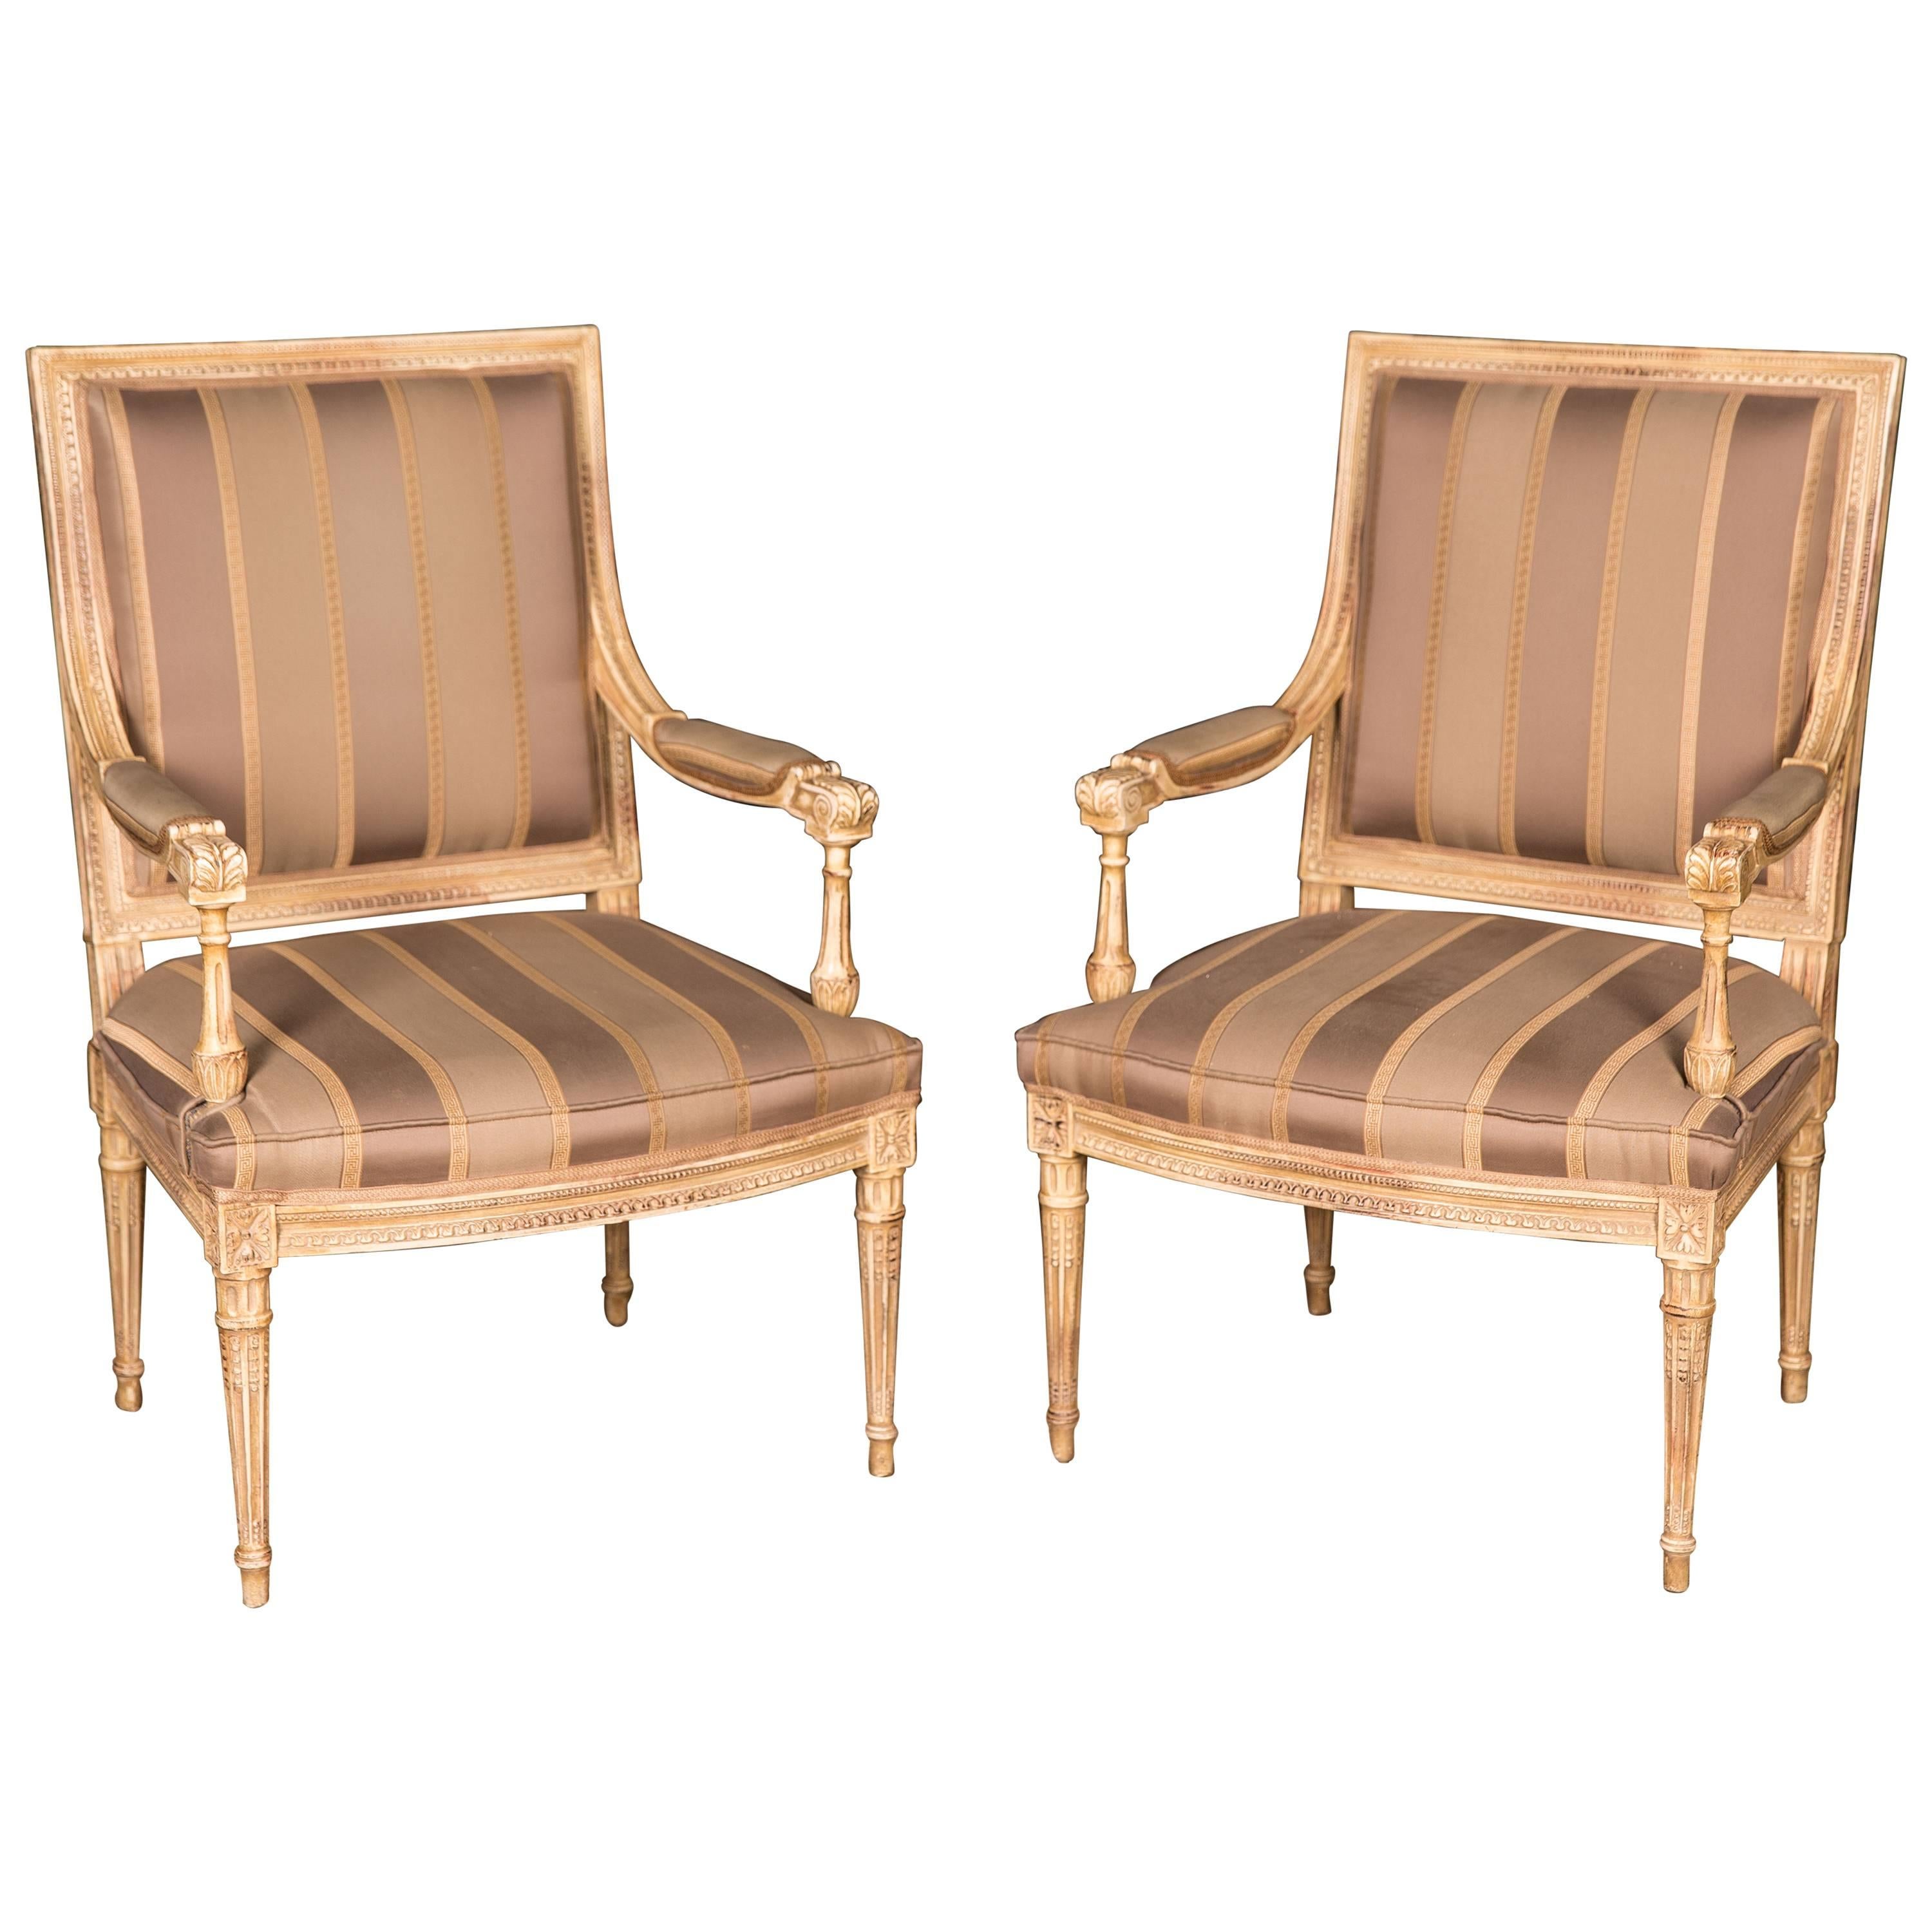 Two Elegant French Armchairs in the Louis Seize Style